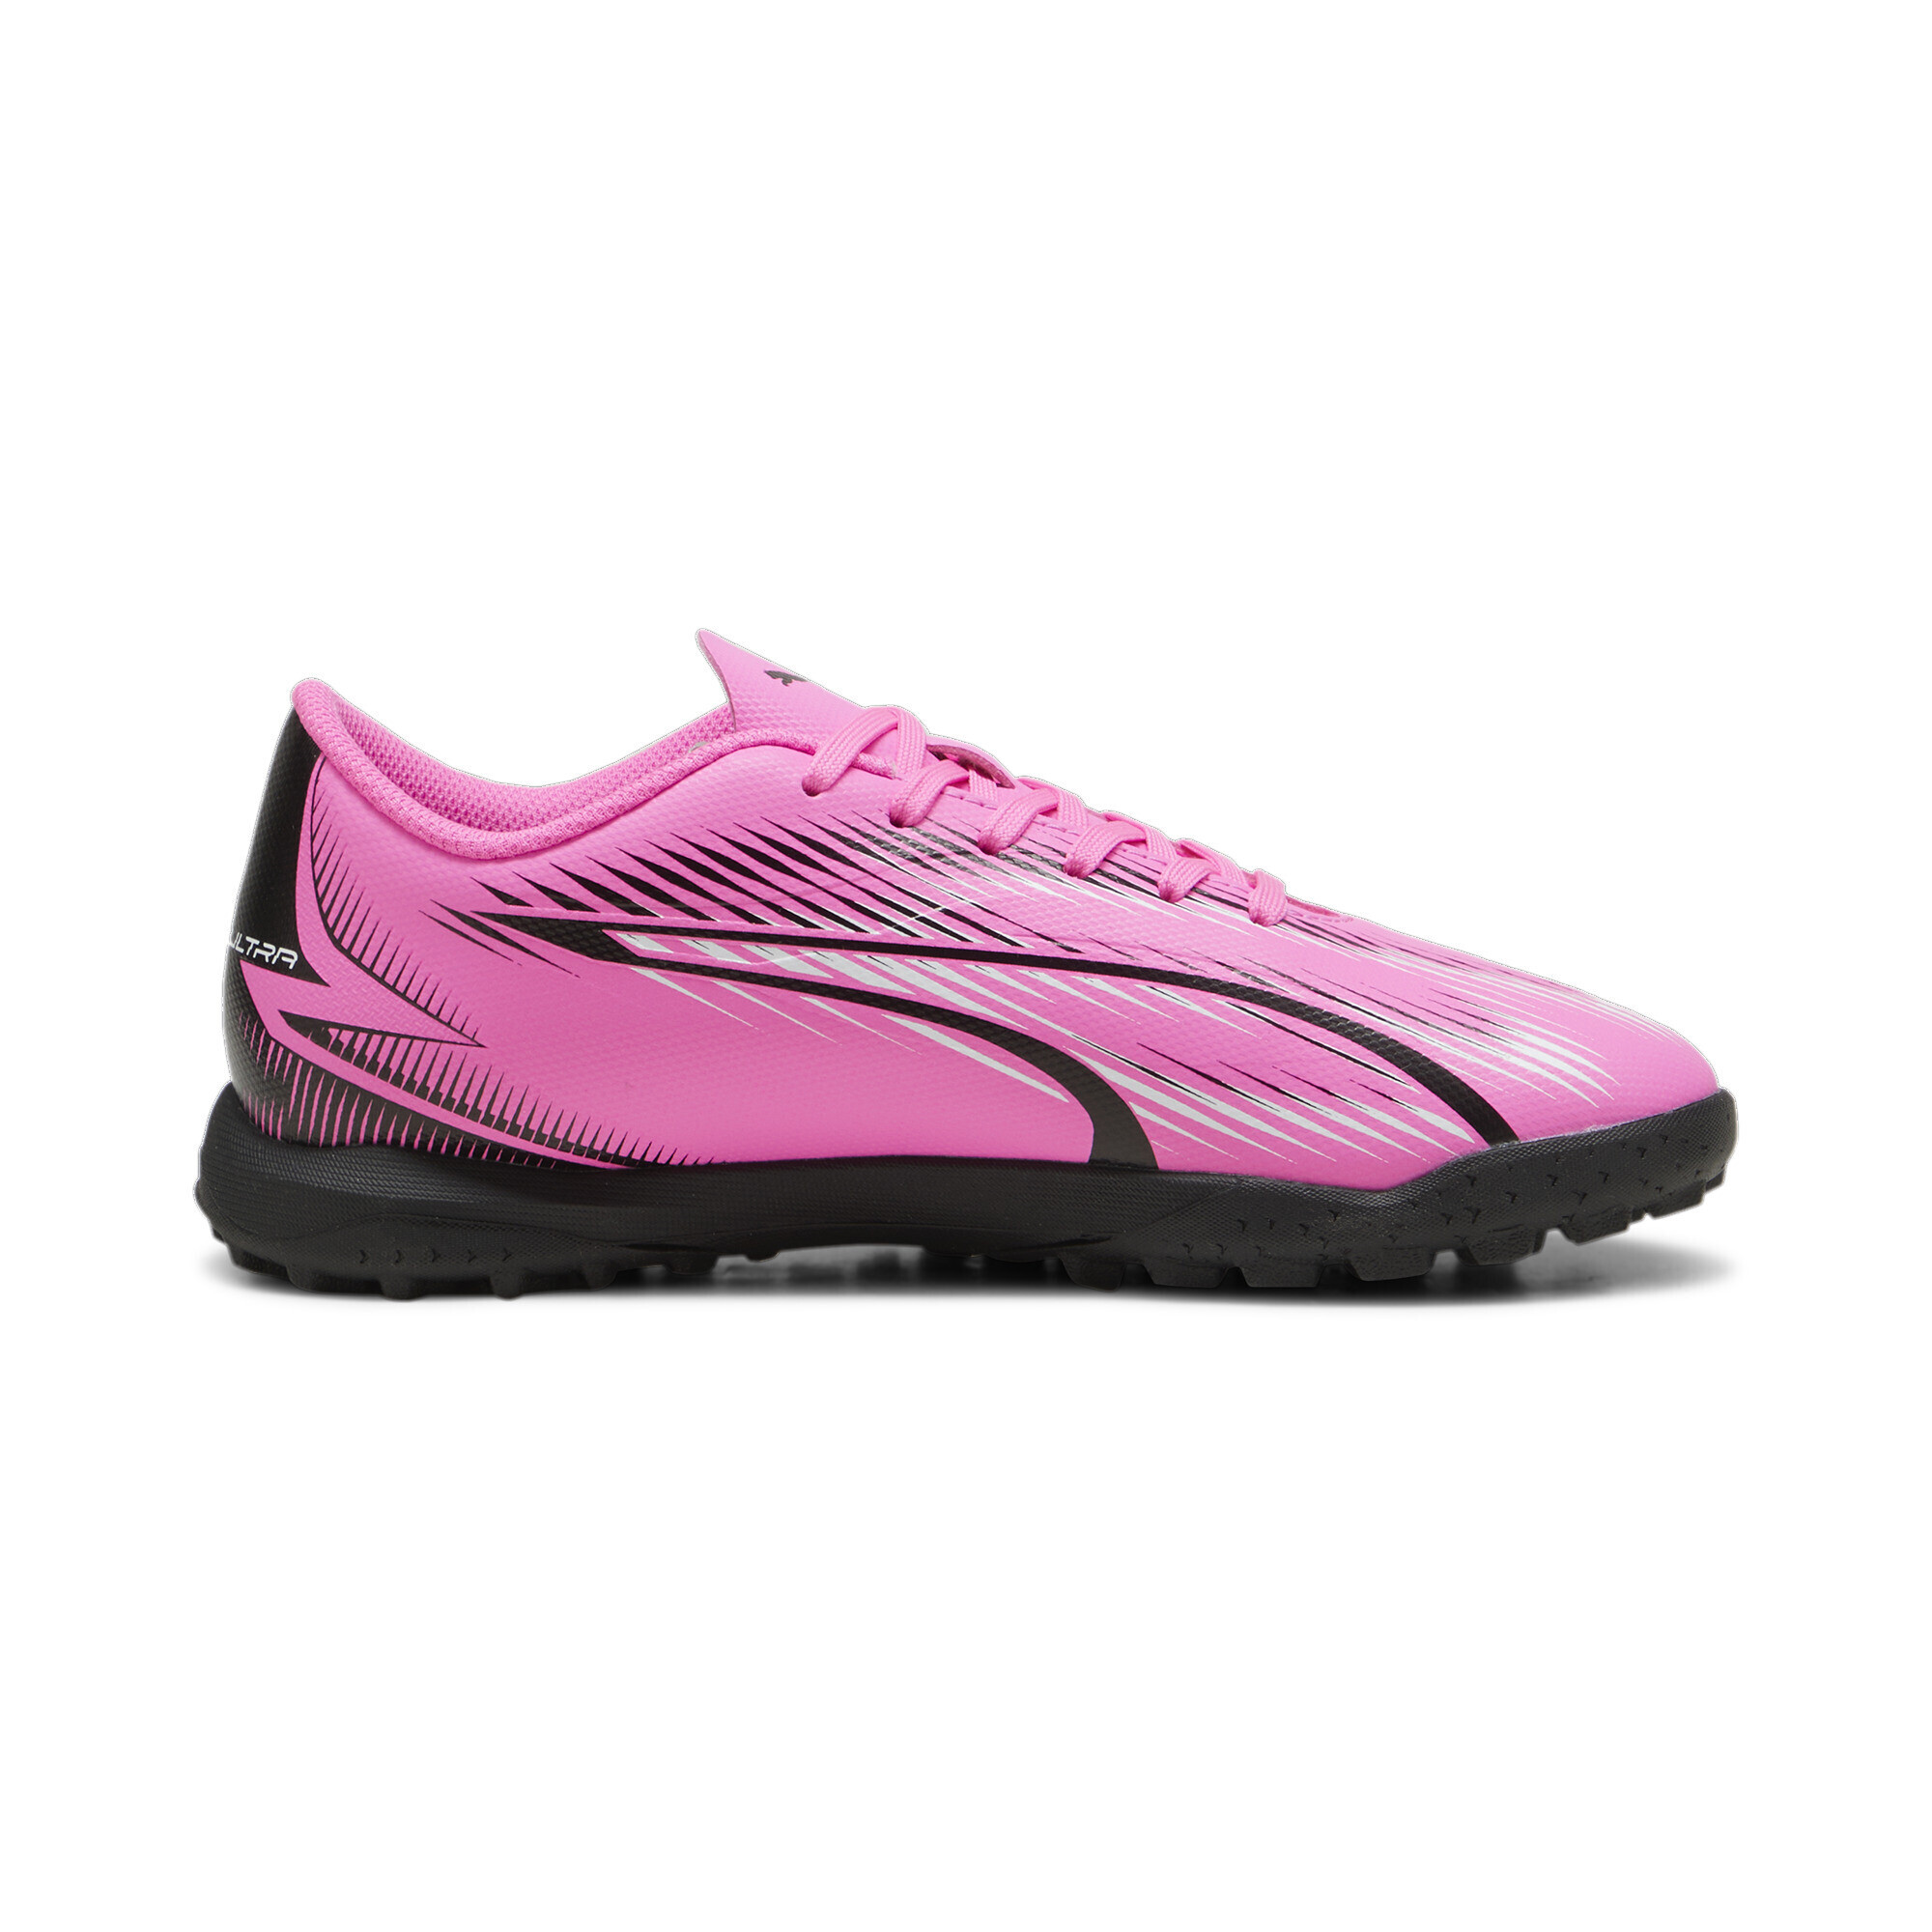 PUMA ULTRA PLAY TT Youth Football Boots In Pink, Size EU 29